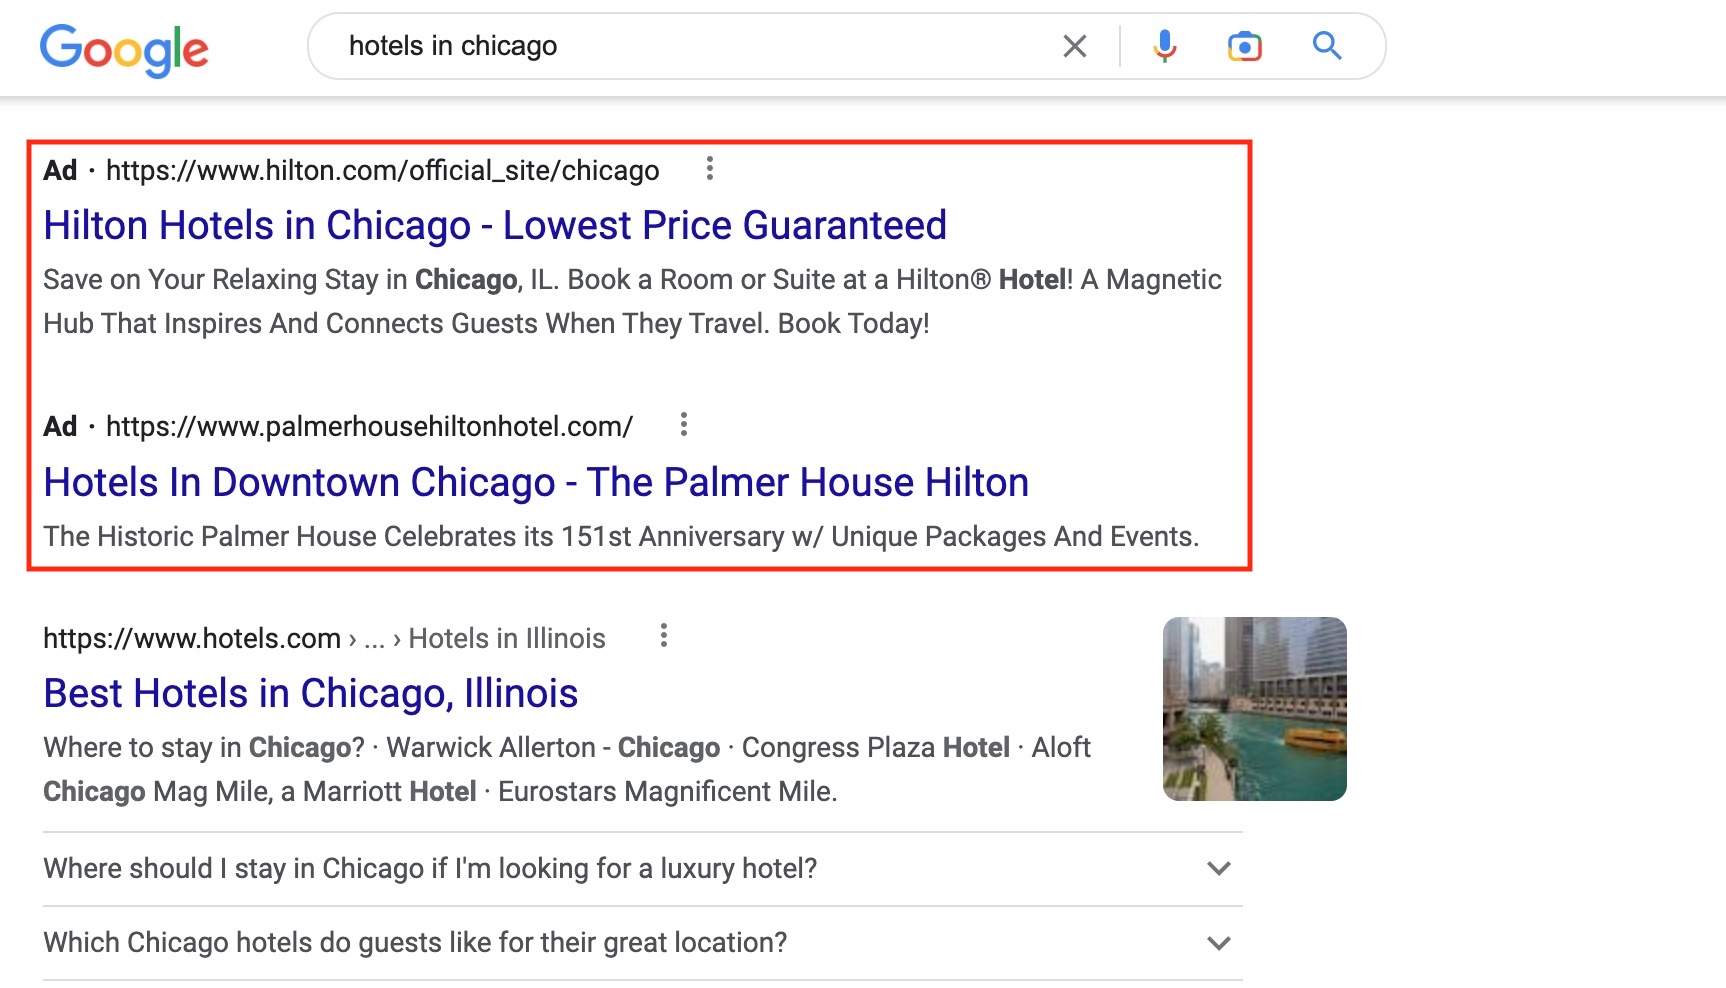 Screenshot of Google search results for search term "hotels in Chicago" with sponsored results highlighted